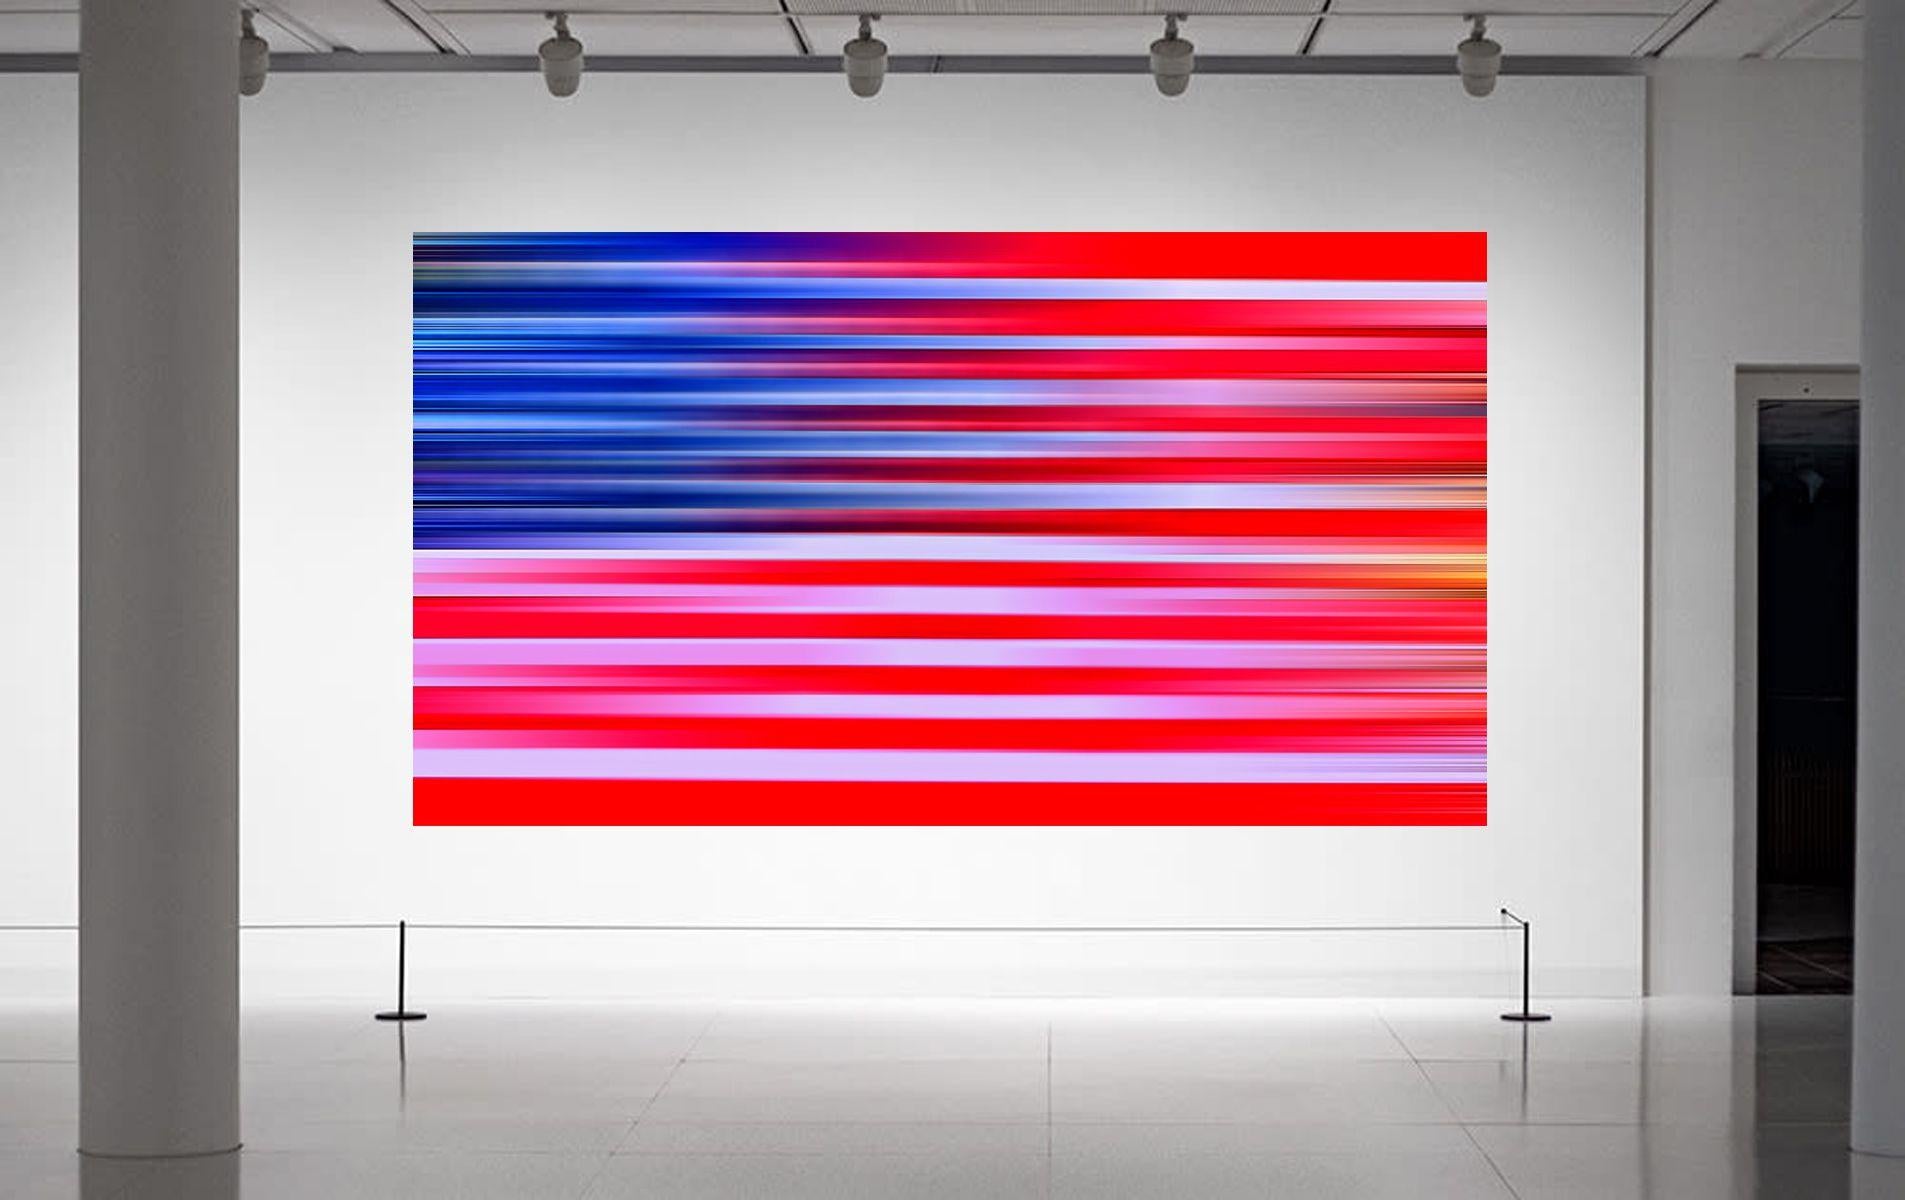 Digitally remastered composition of multilayers of the US flag C-print on Alu-Dibond behind acrylic glass - museum quality - ready to hang - limited edition - other sizes upon request :: Photograph :: Color :: This piece comes with an official